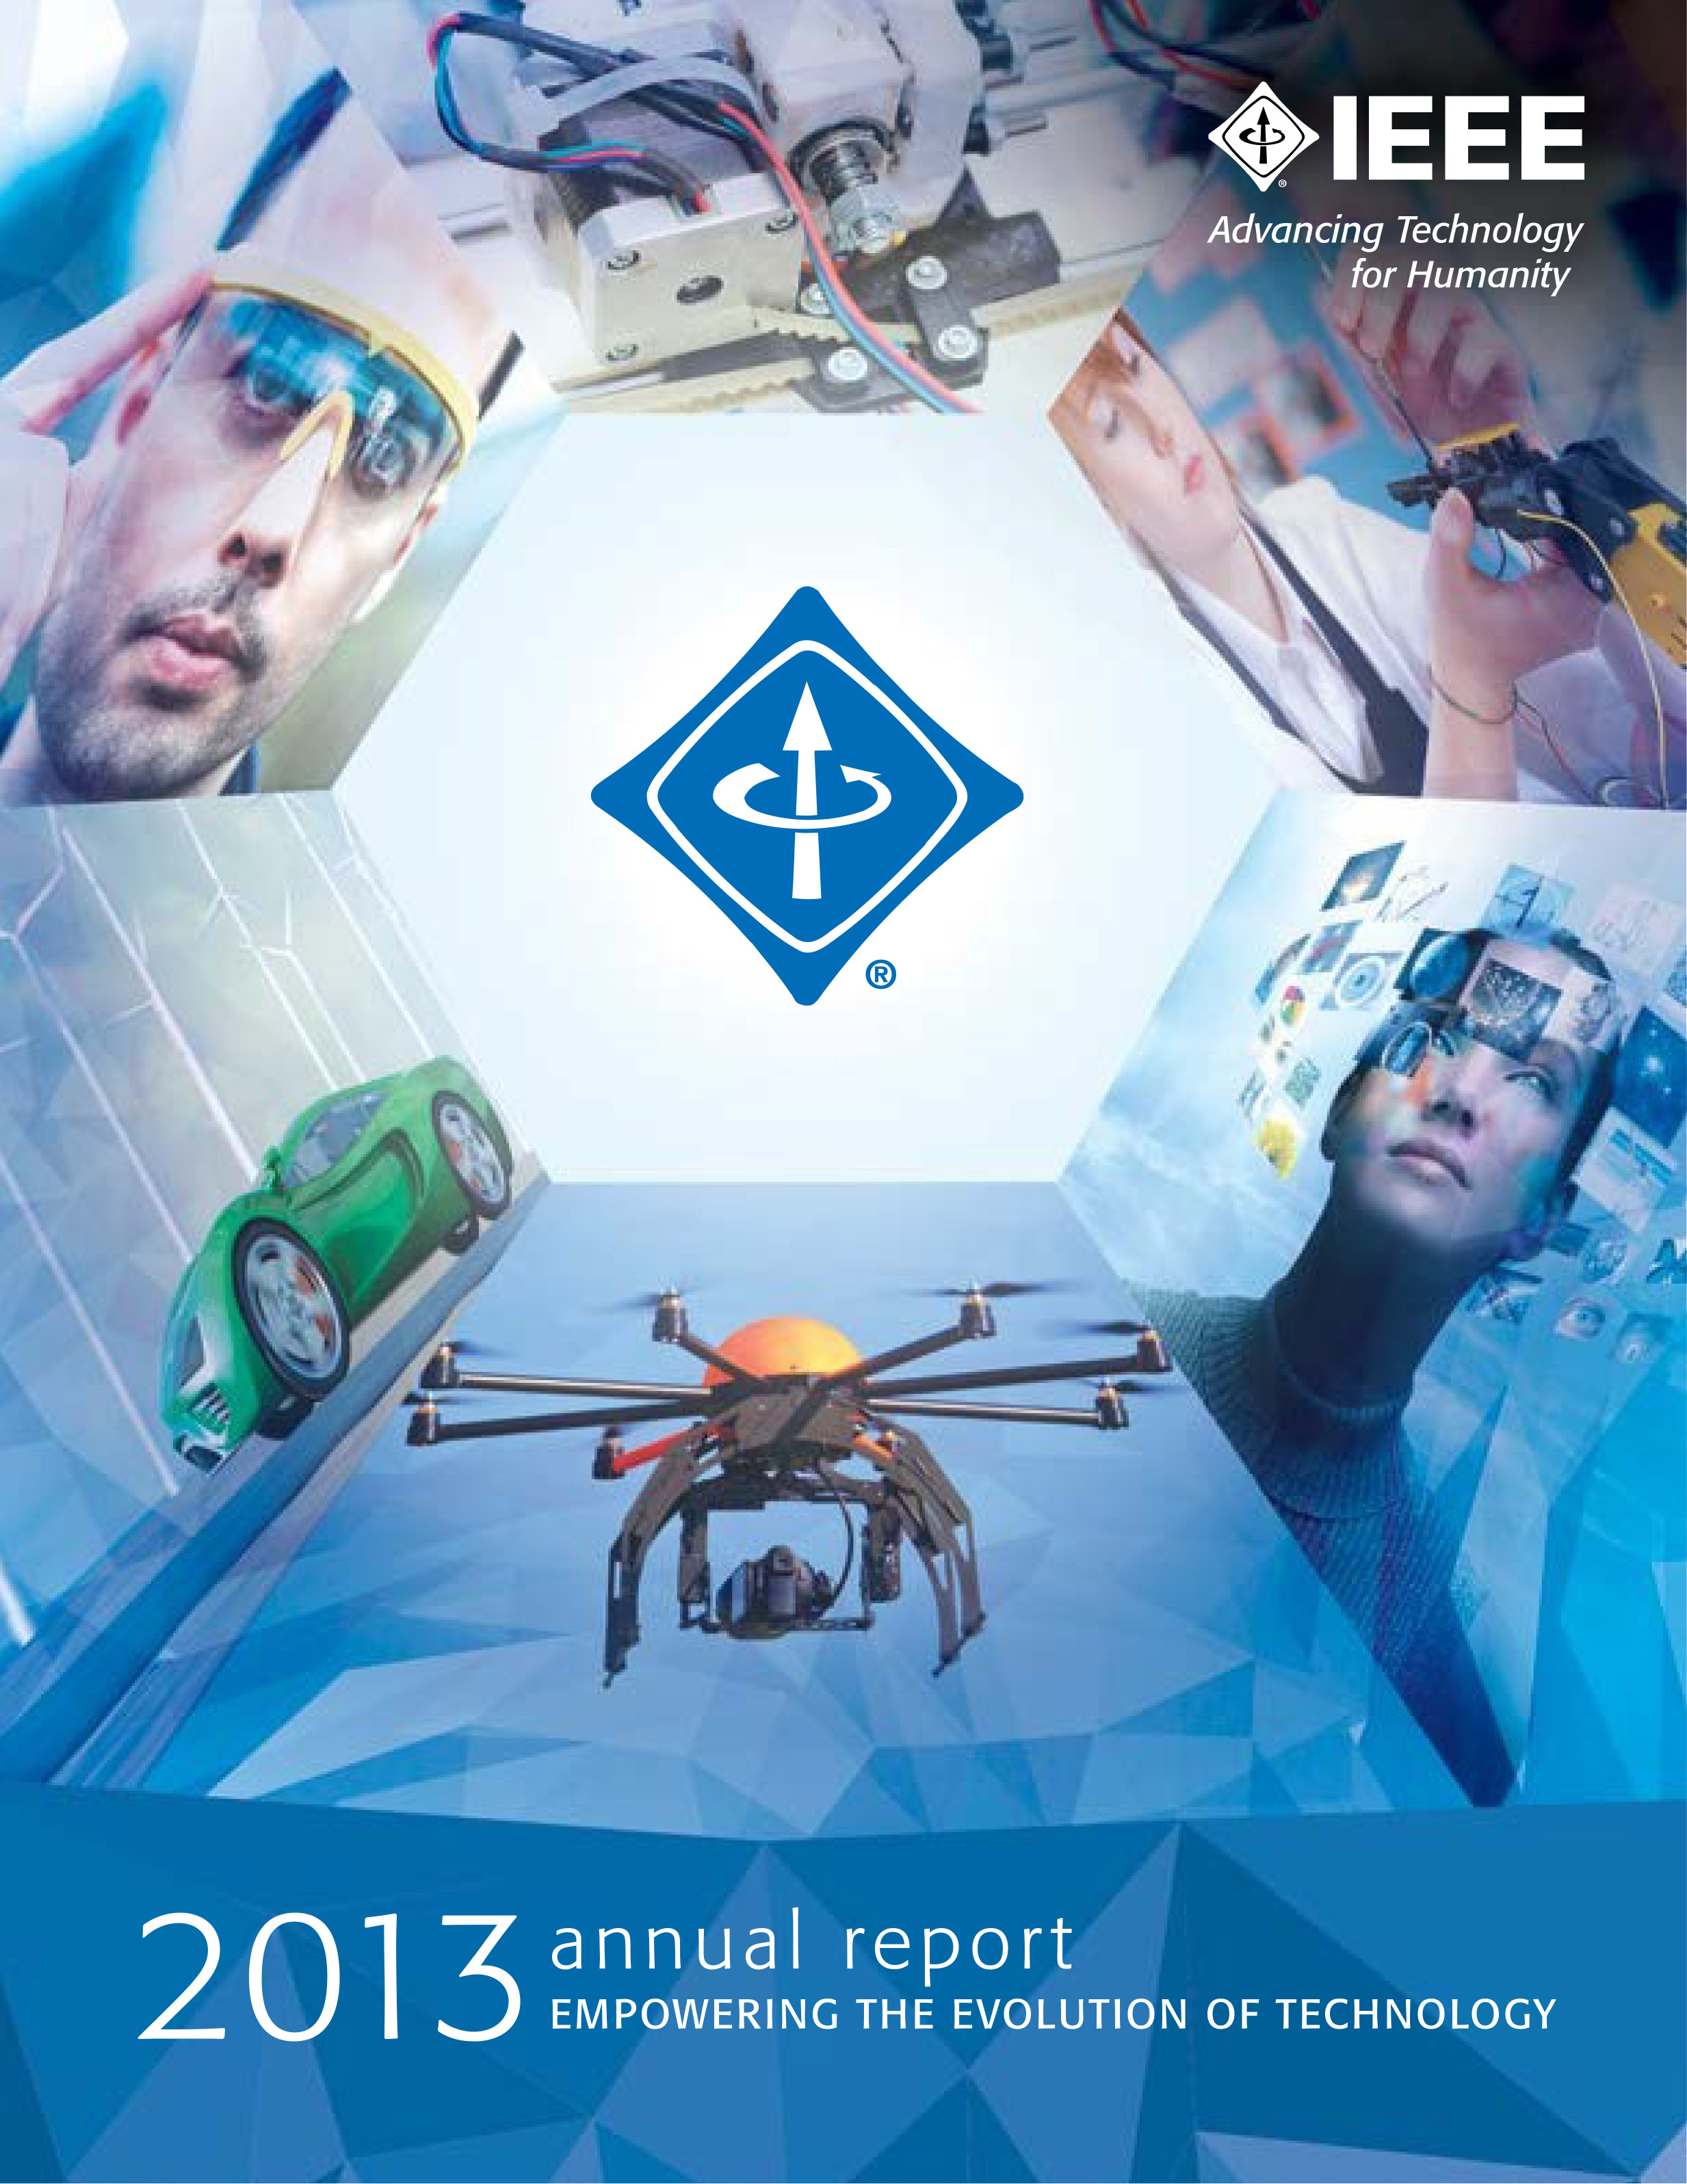 IEEE 2013 Annual Report PDF - ieee_2013_annual_report_final-1.pd